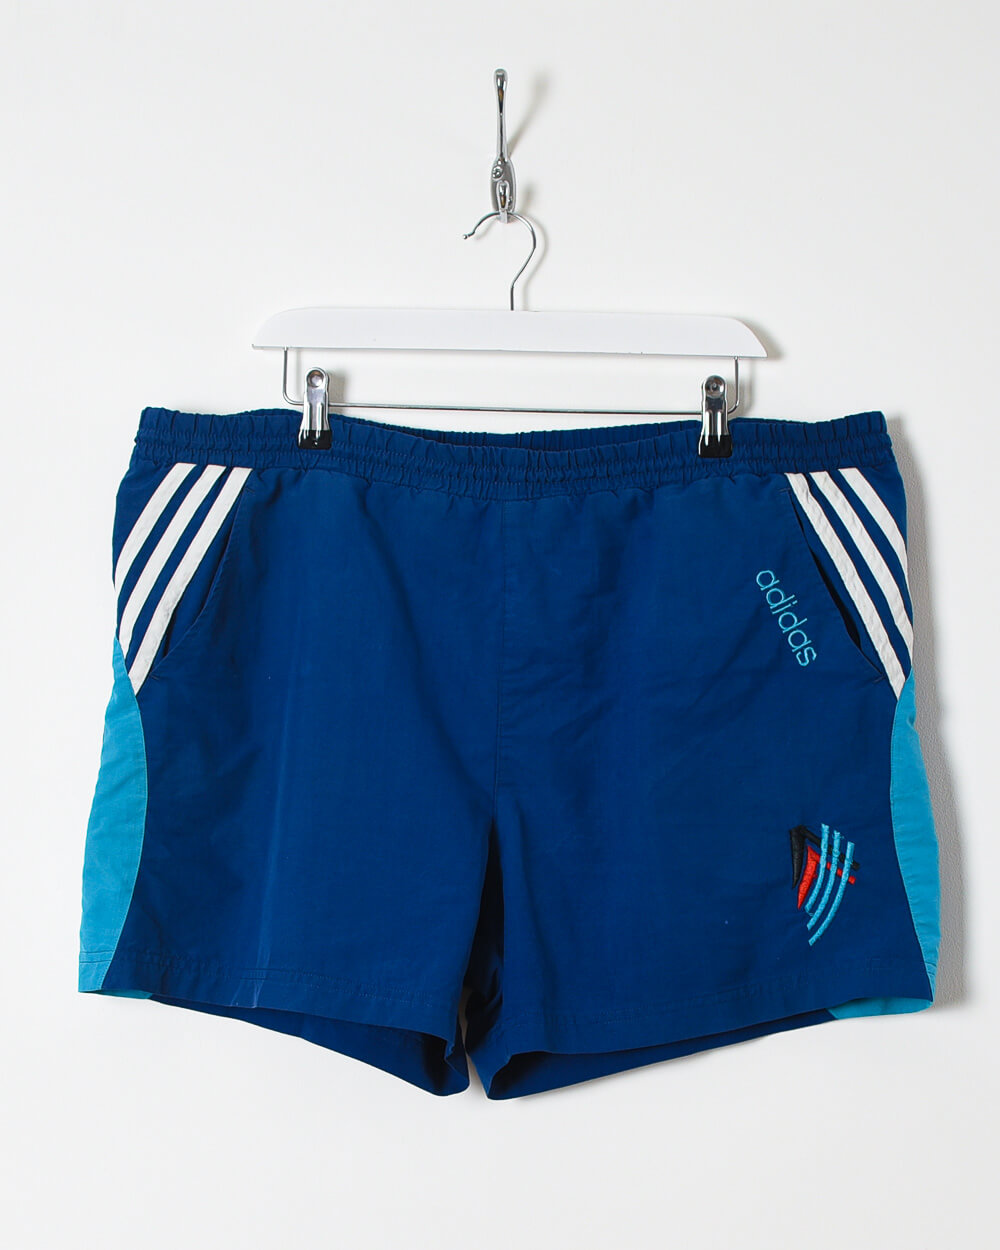 Adidas Swimming Shorts - W40 L15 - Domno Vintage 90s, 80s, 00s Retro and Vintage Clothing 